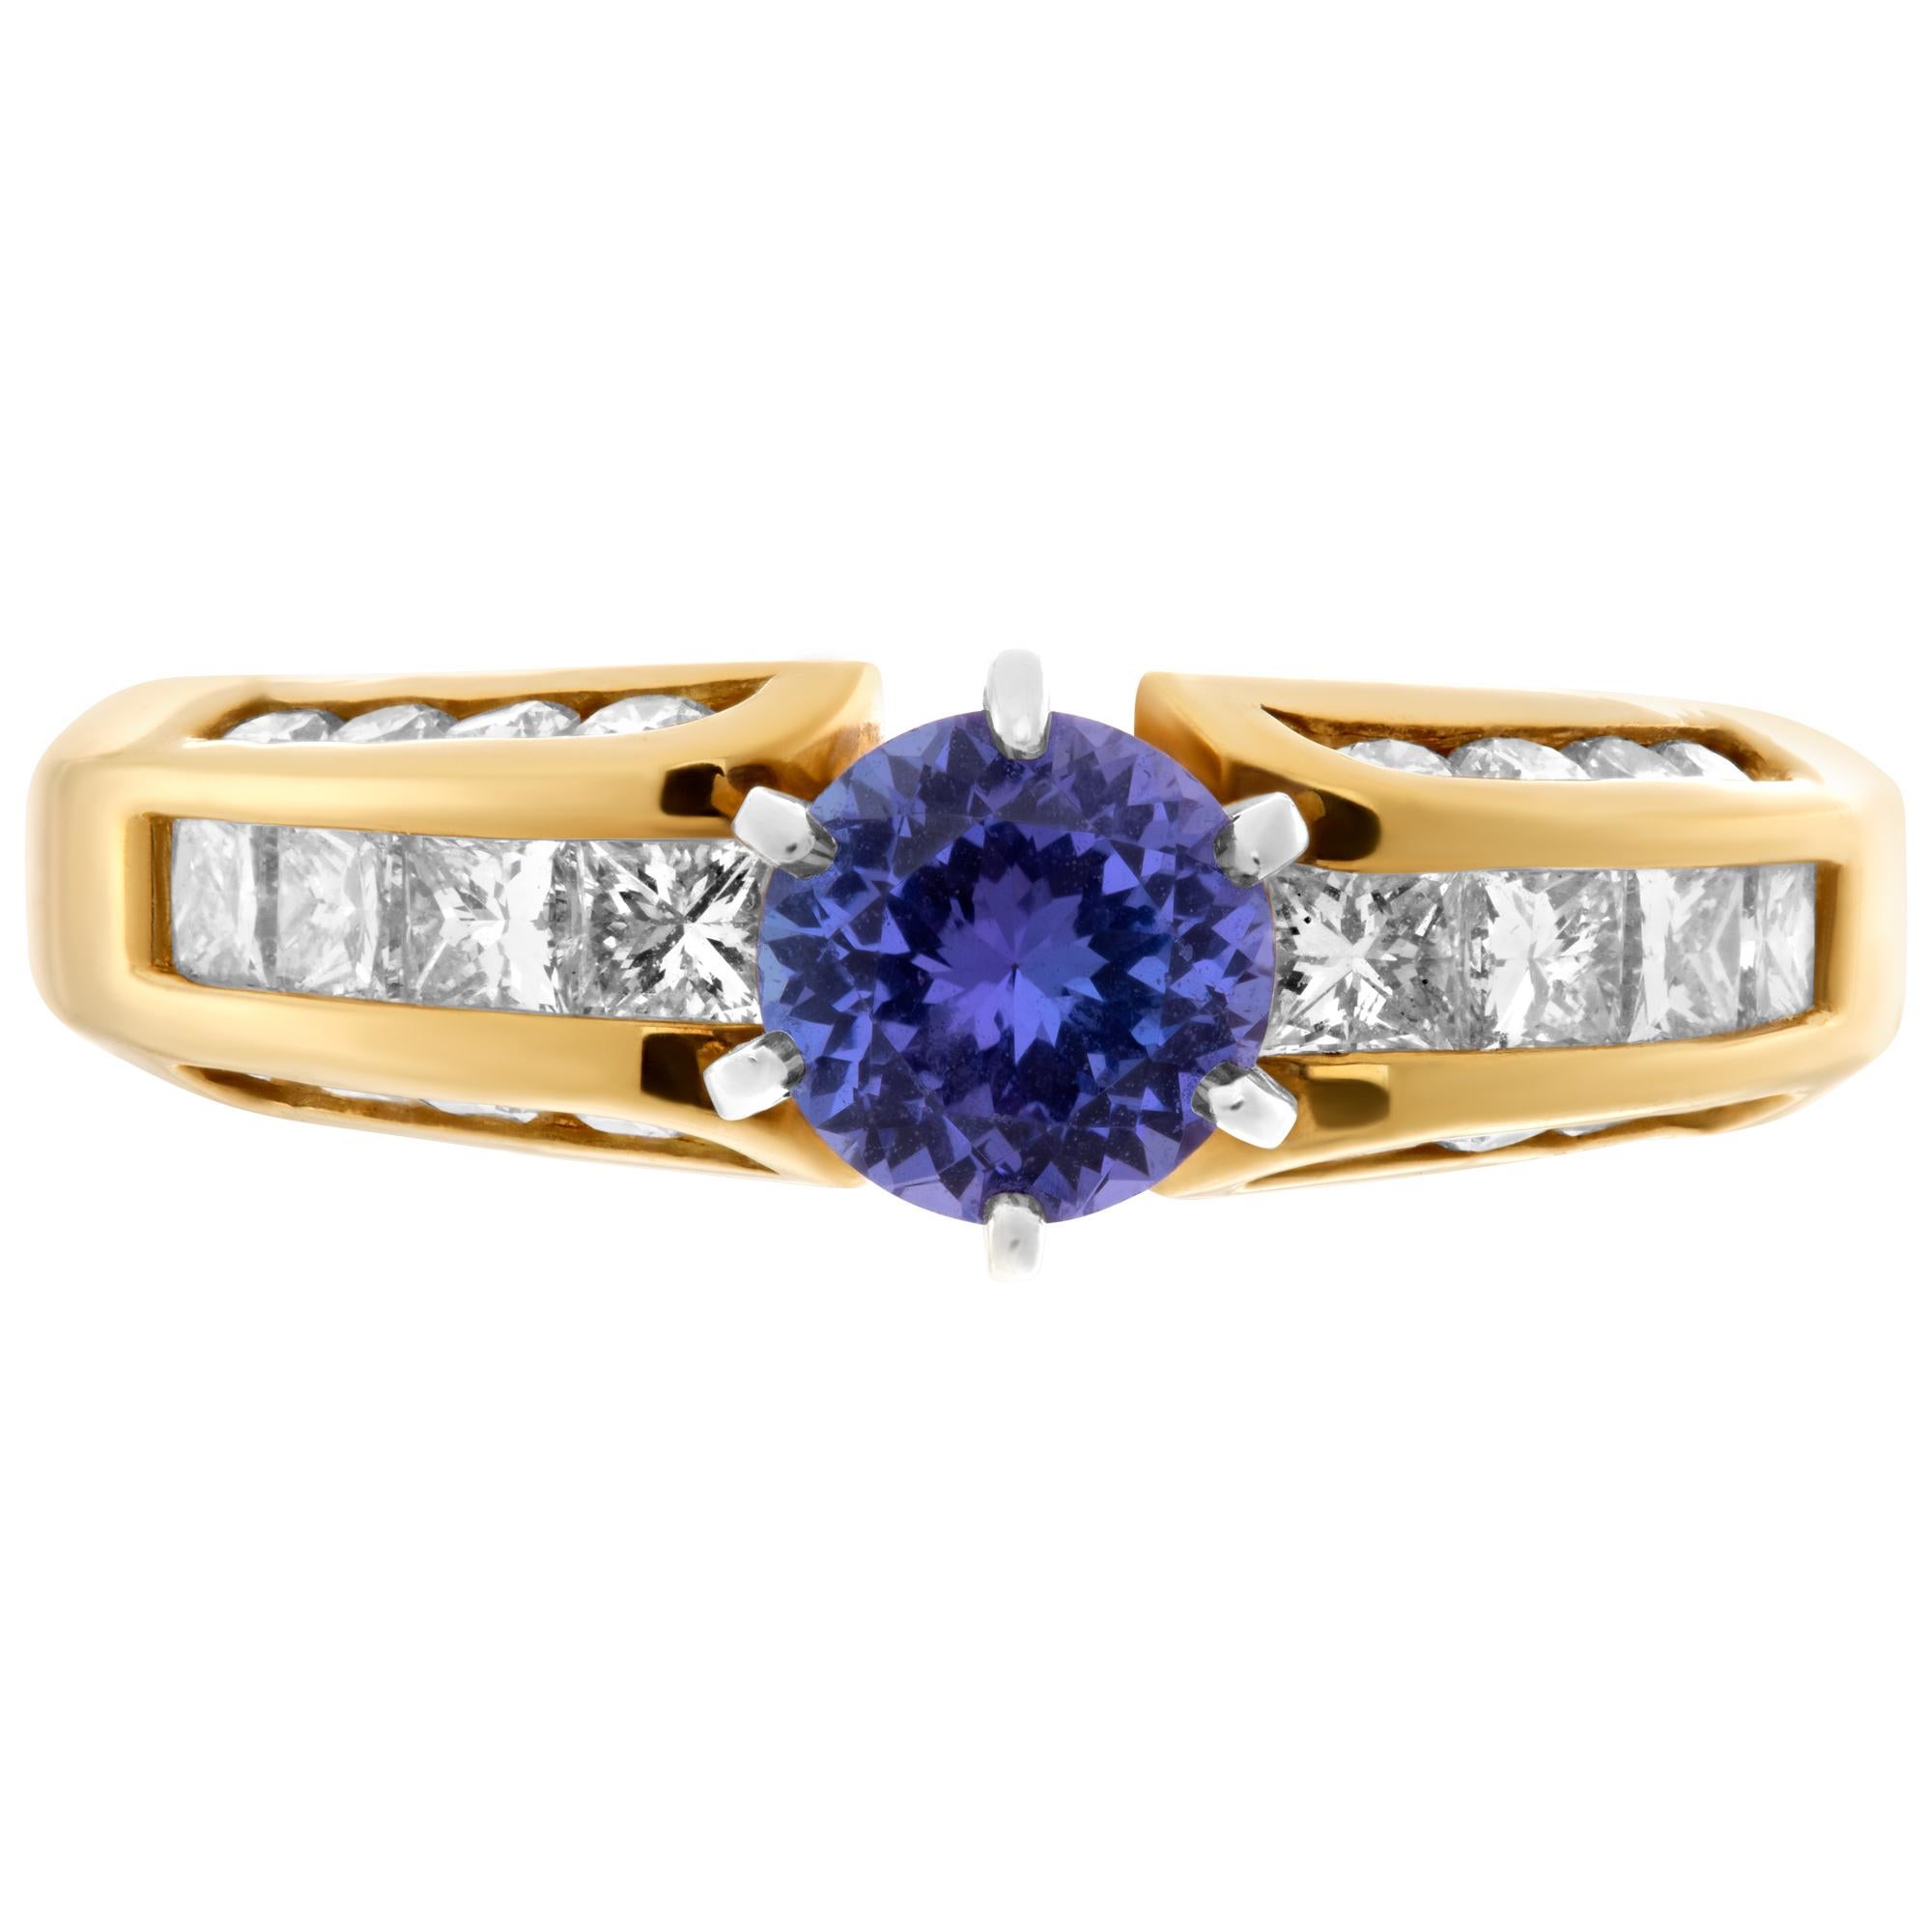 Beautiful tanzanite ring in 18k yellow gold with 0.75 carat tanzanite and 0.75 carats of diamonds accenting top and sides of band. Size 8.25.This Diamond ring is currently size 8.5 and some items can be sized up or down, please ask! It weighs 4.4